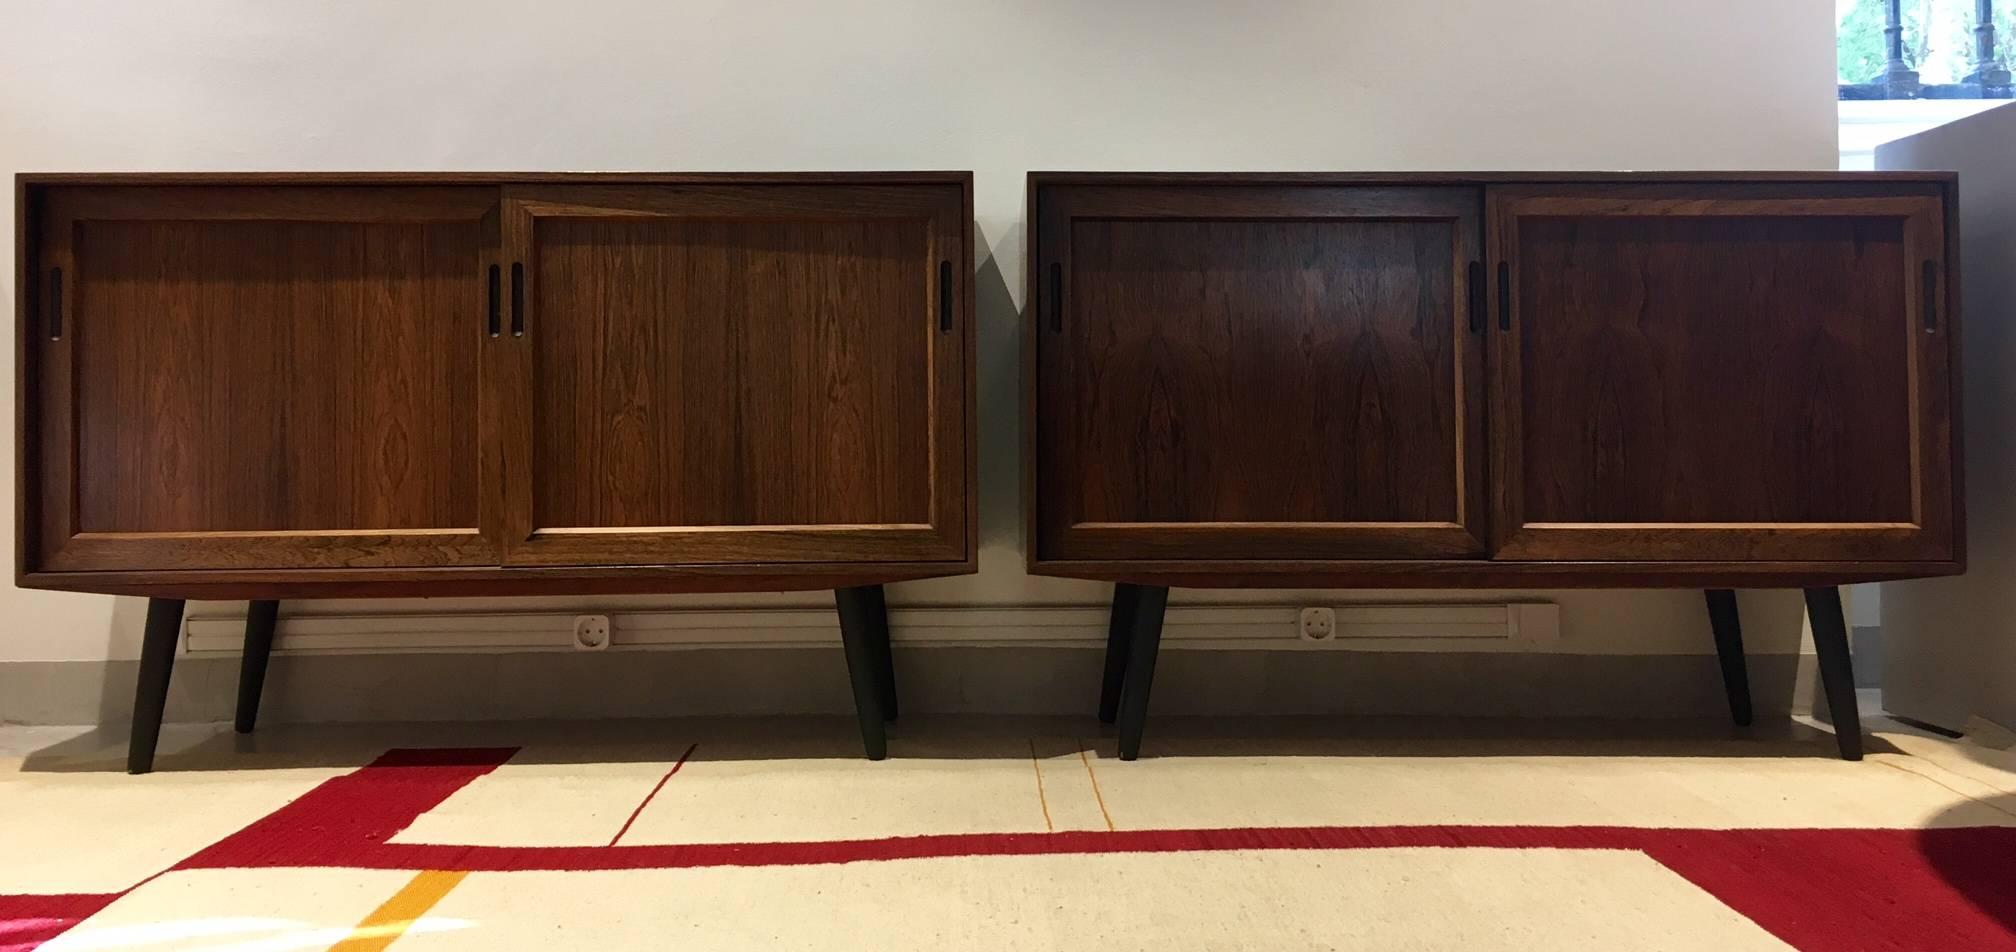 Pair of midcentury sideboards made of Rio rosewood by unidentified Danish furniture producer. Each has two sliding doors and interior fitted with shelves. Round stained wood legs. Excellent condition.